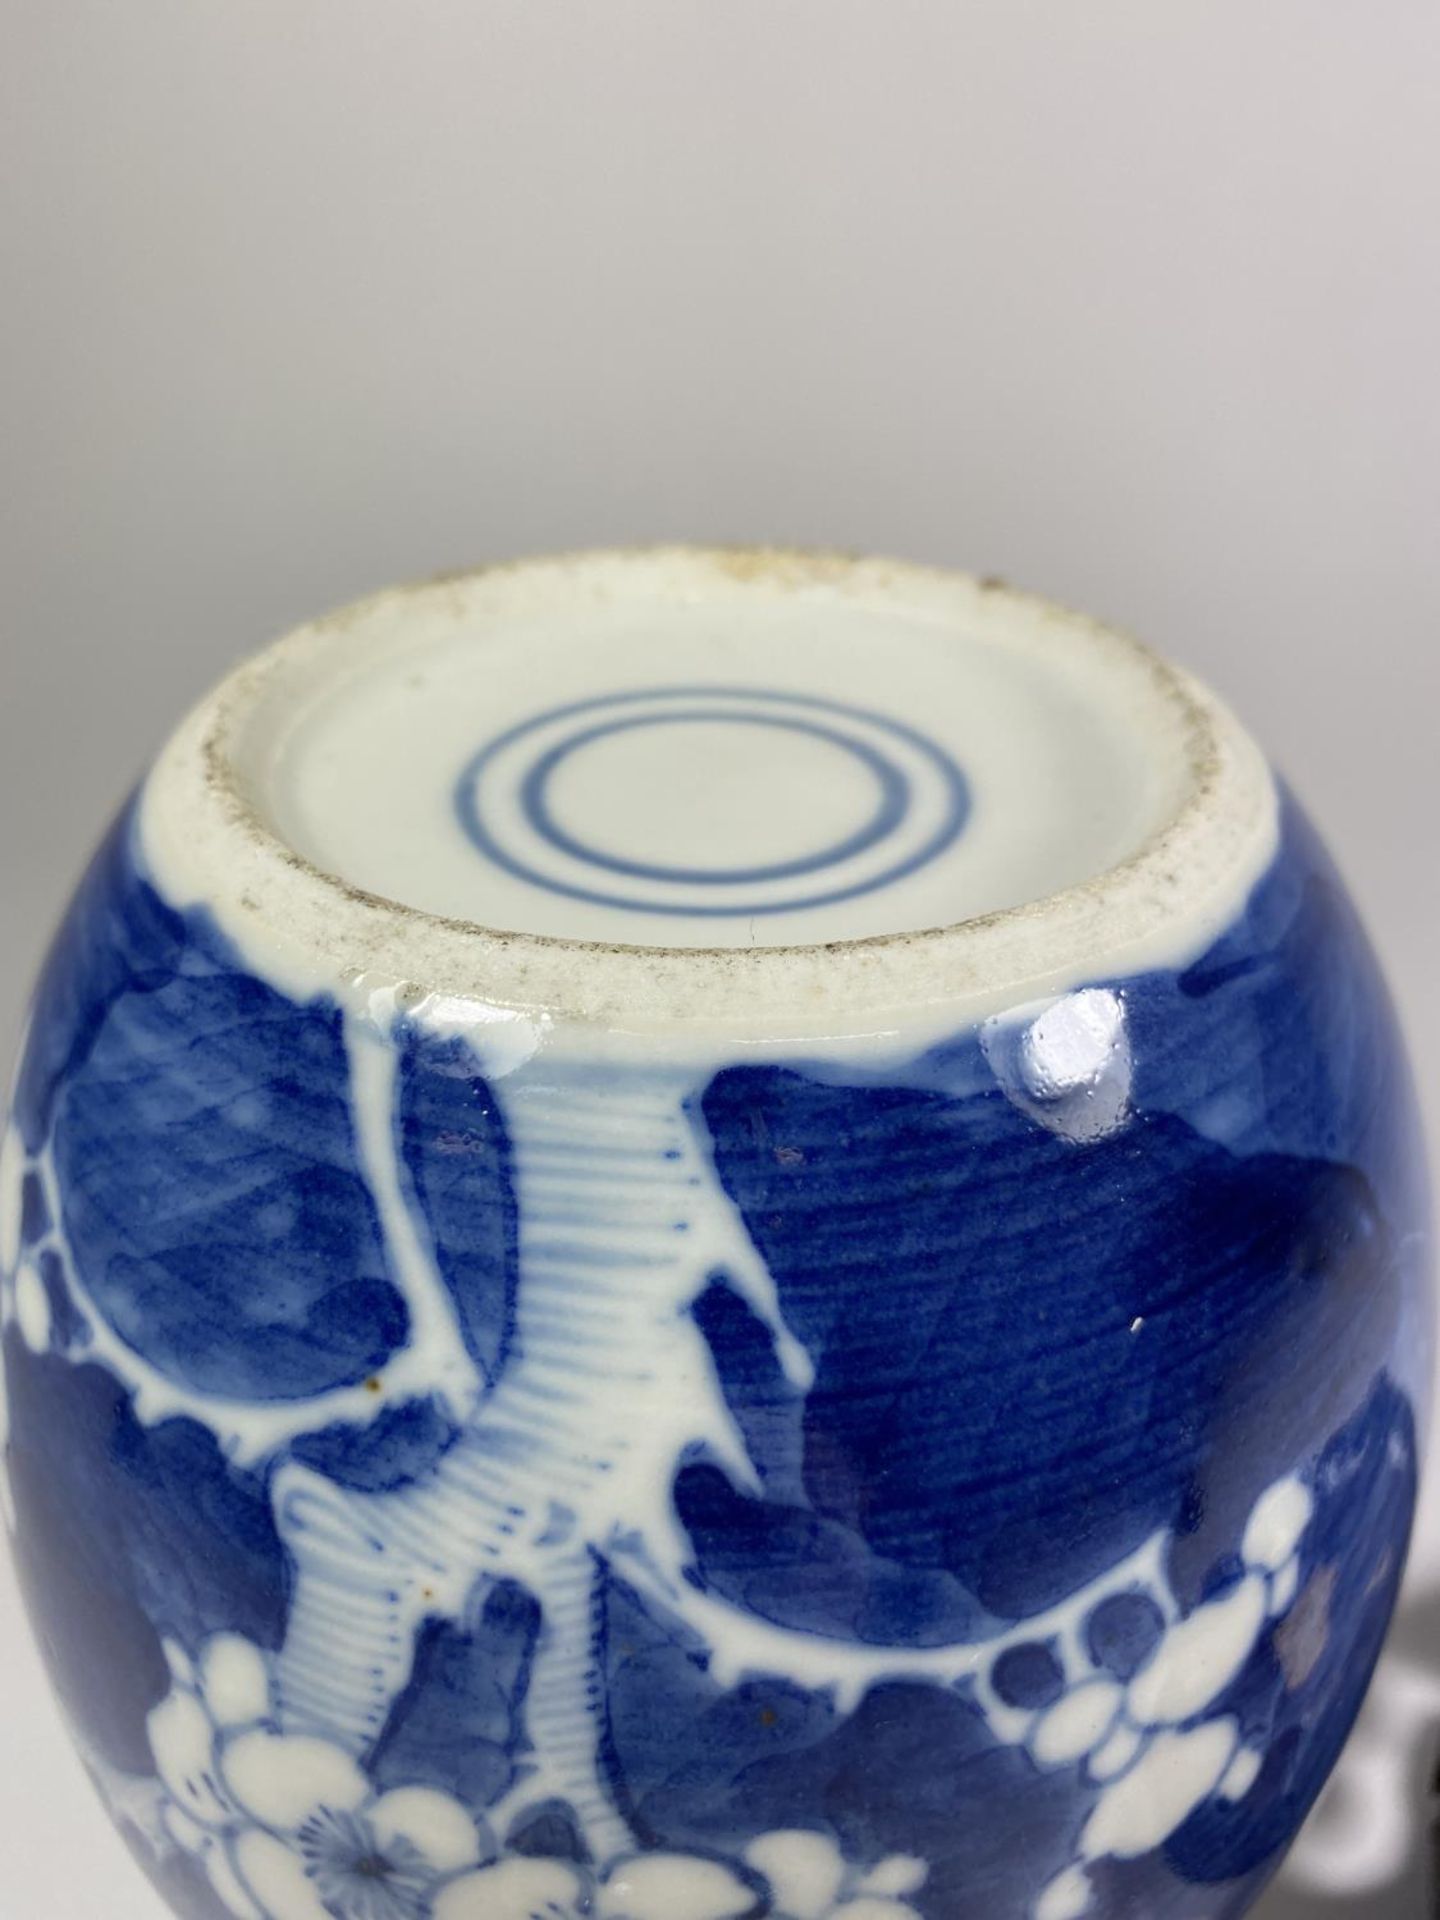 A LATE 19TH CENTURY CHINESE PORCELAIN PRUNUS BLOSSOM PATTERN GINGER JAR ON WOODEN BASE, DOUBLE - Image 4 of 5